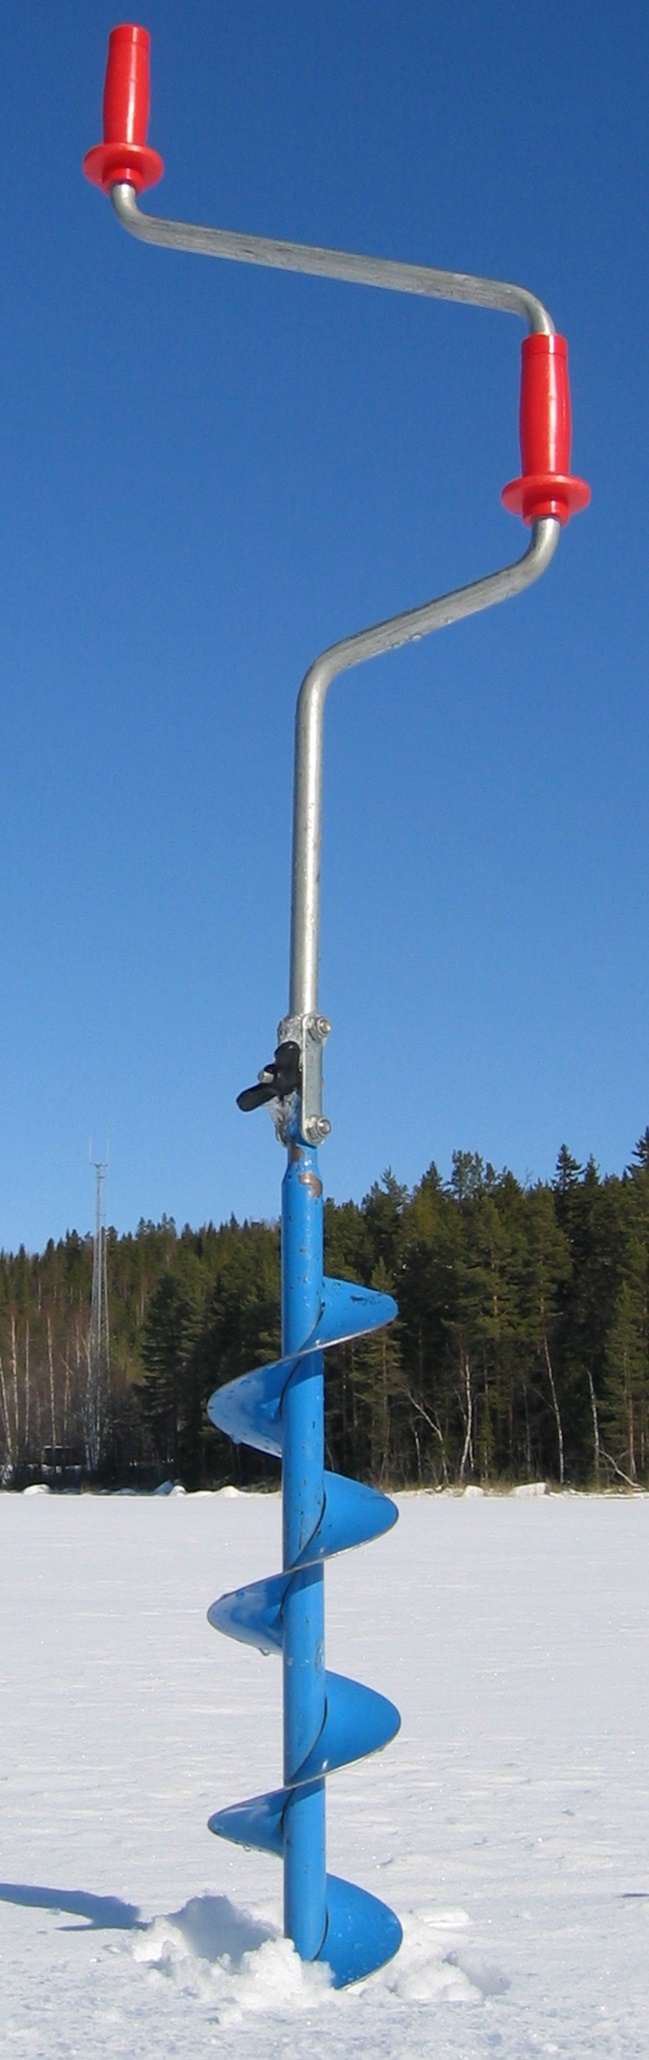 File:Ice auger cropped.jpg - Wikipedia